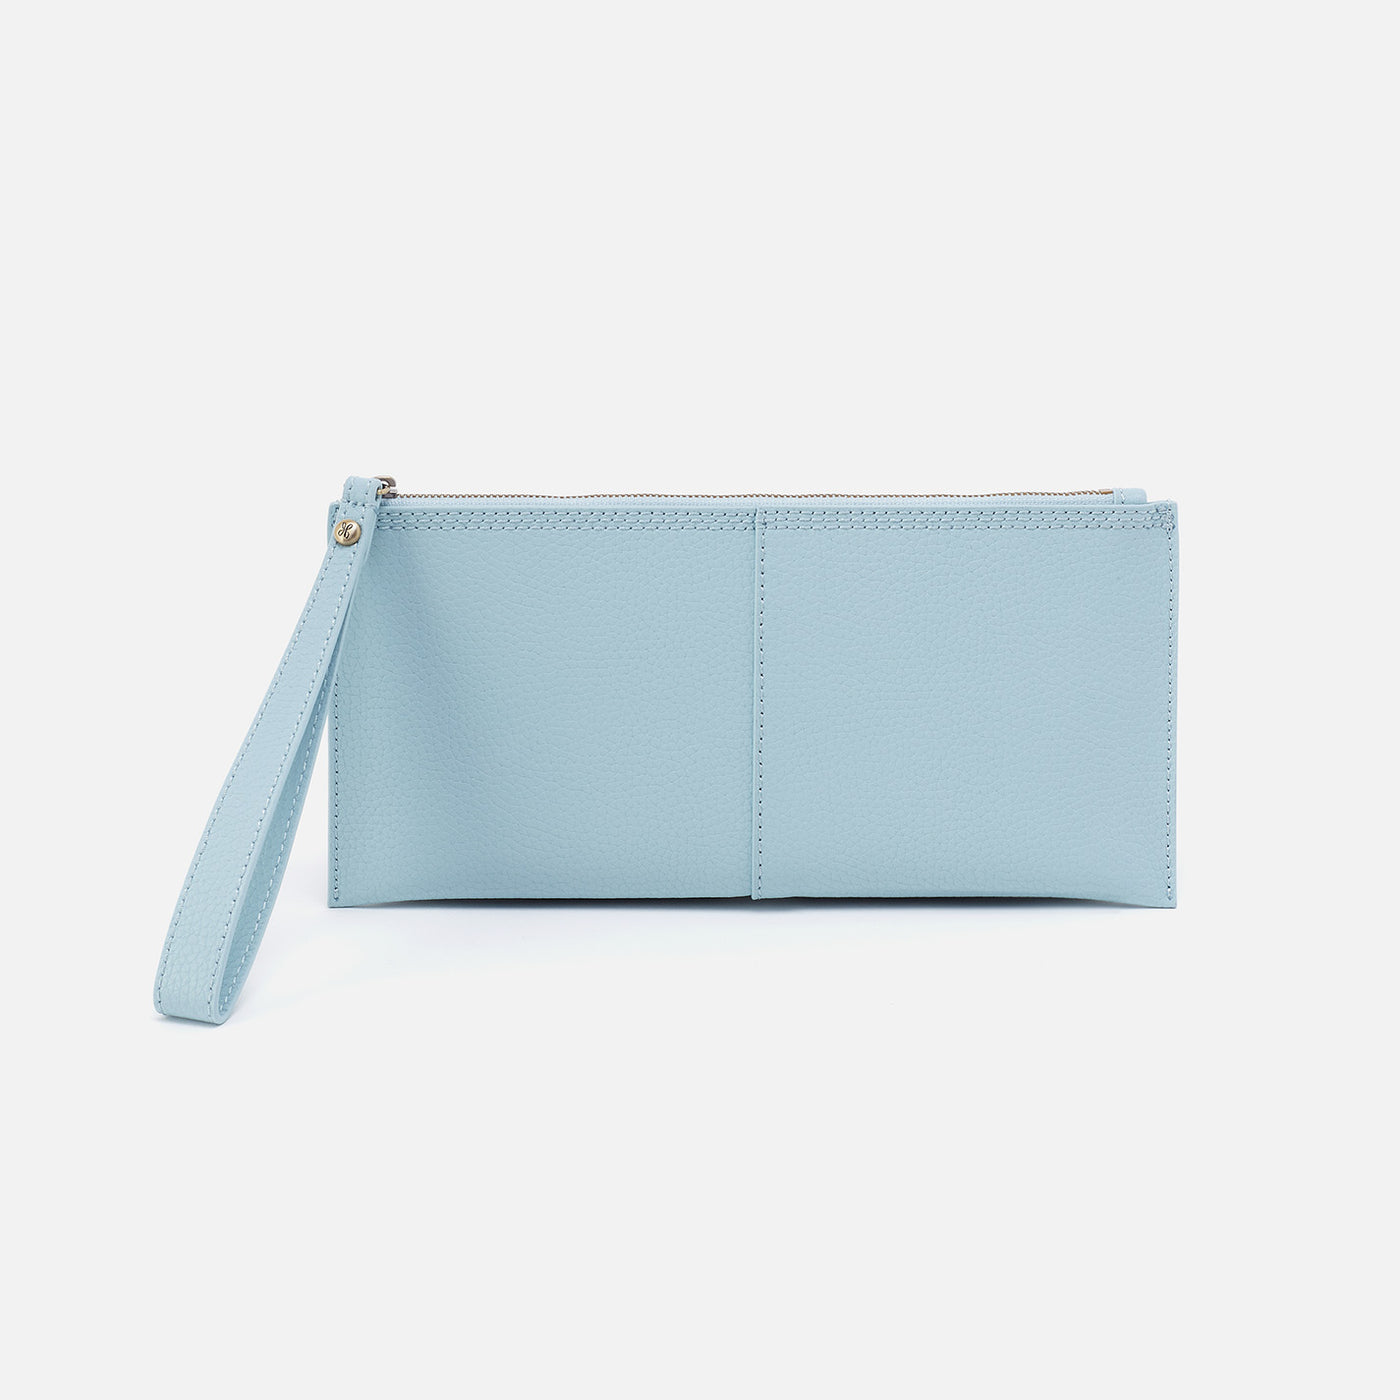 Vida Large Pouch in Micro Pebbled Leather - Starlight Blue